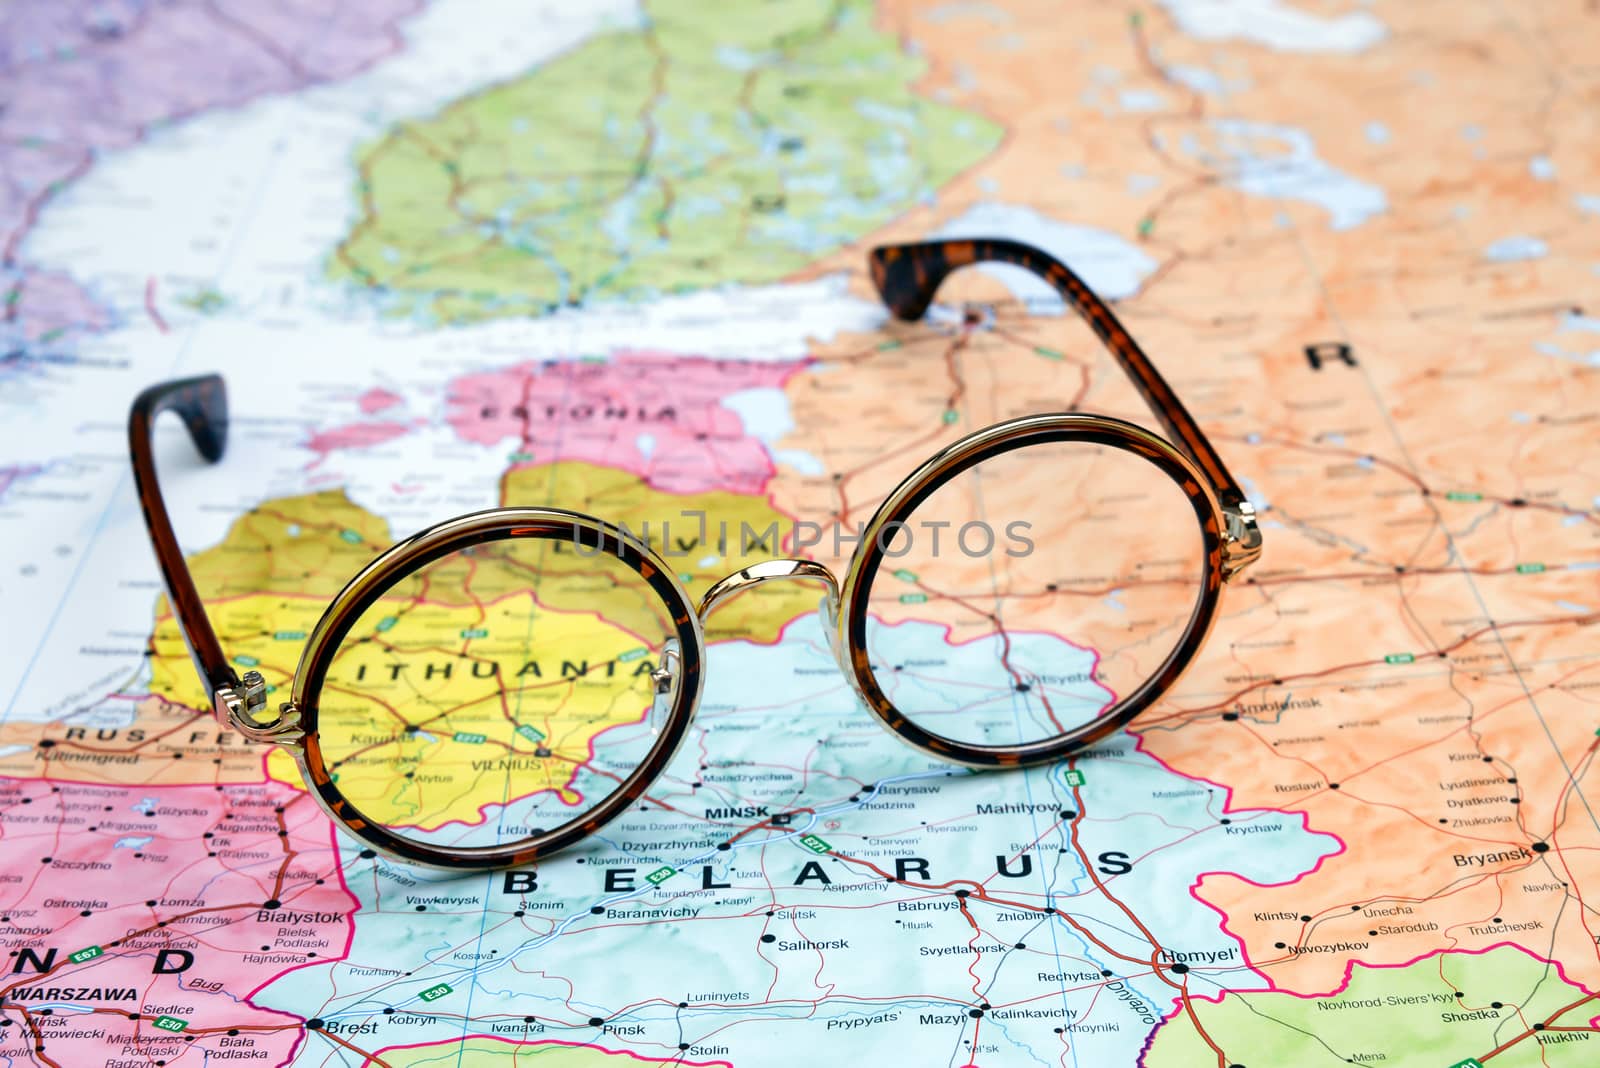 Glasses on a map of europe - Lithuania by dk_photos